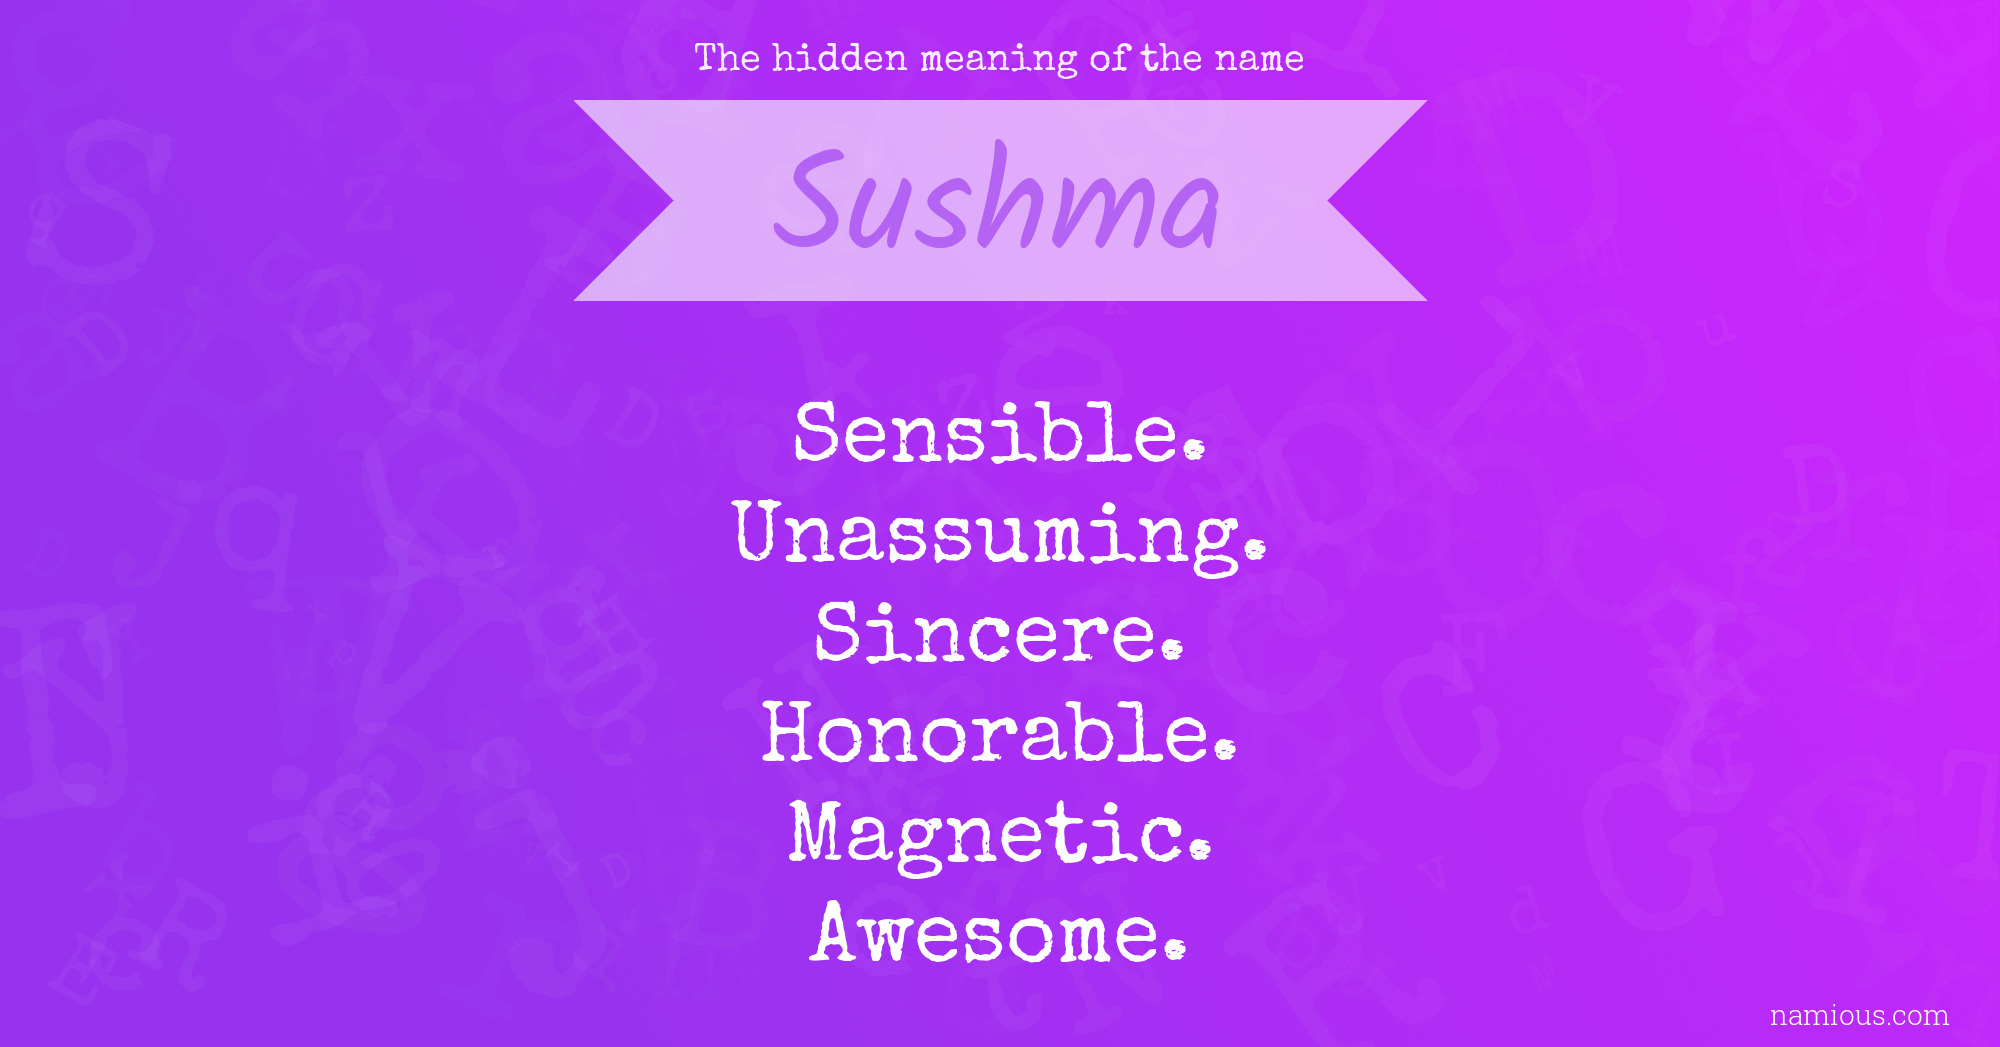 The hidden meaning of the name Sushma